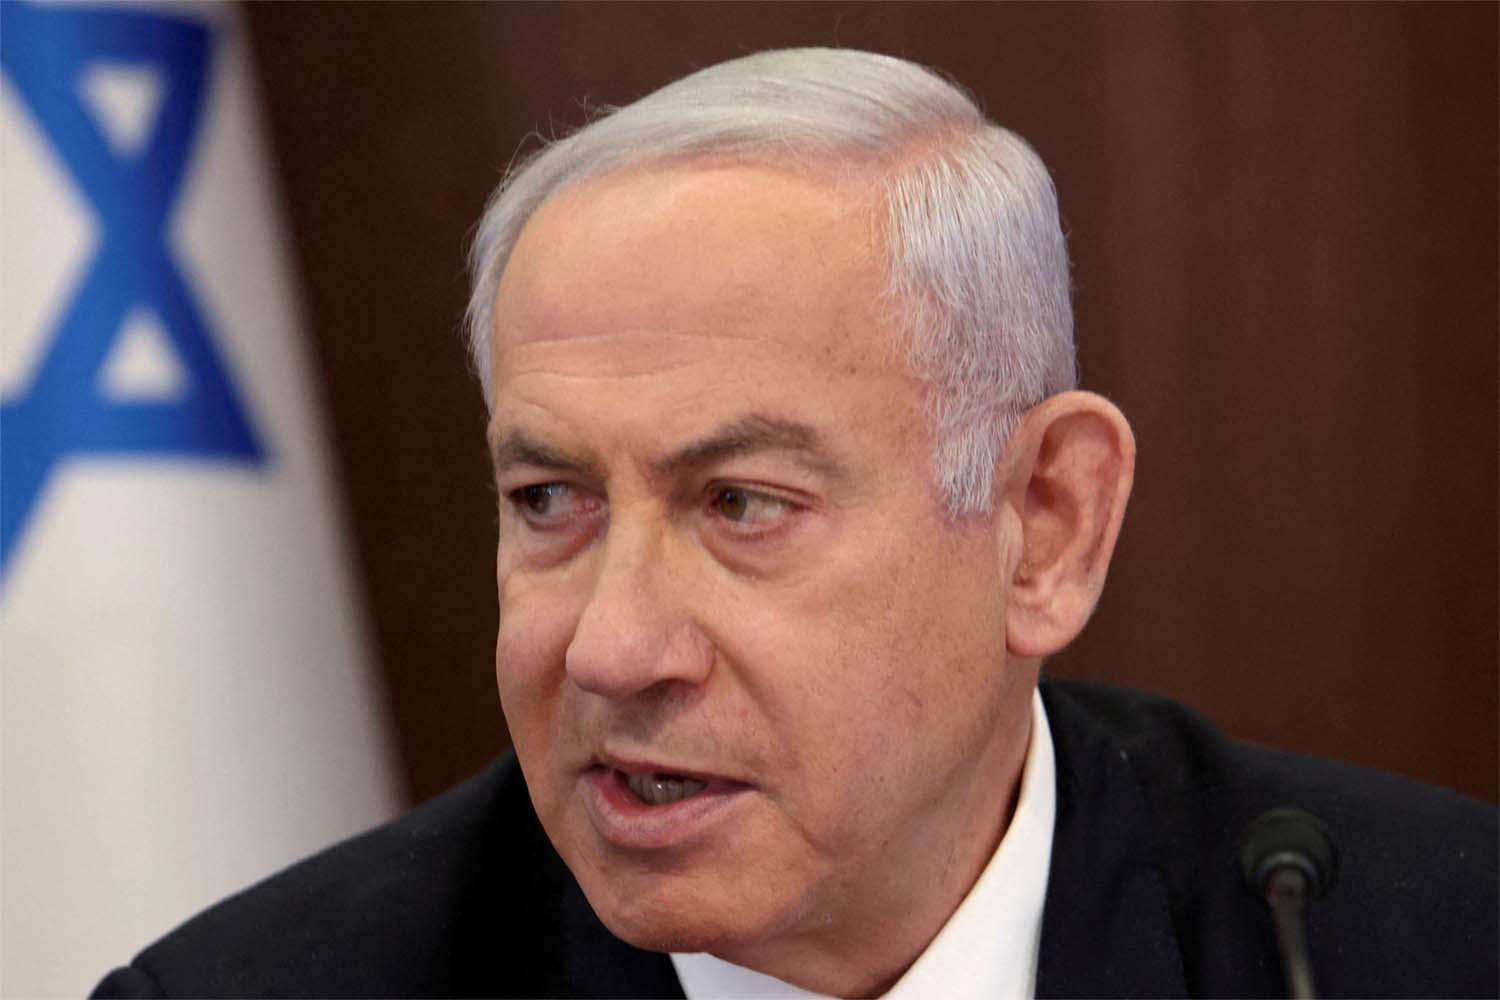 Netanyahu’s dream of normalizing relations with Saudi Arabia will not be realized